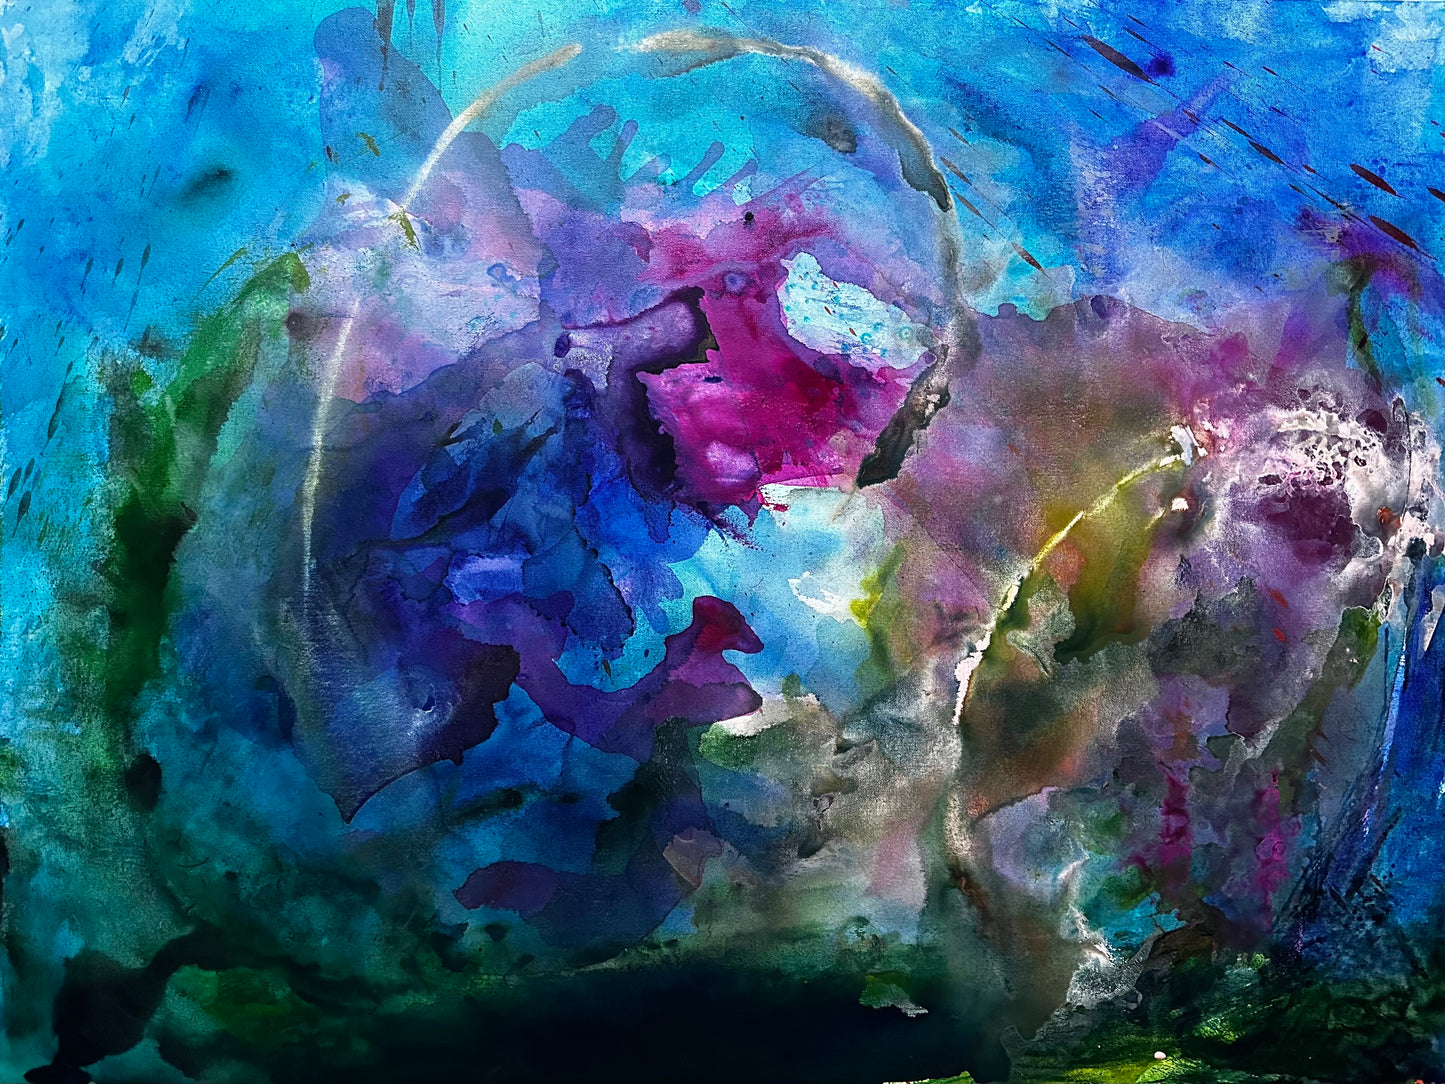 Abstract acrylic painting of a deep sea scene in blue and purple colors.